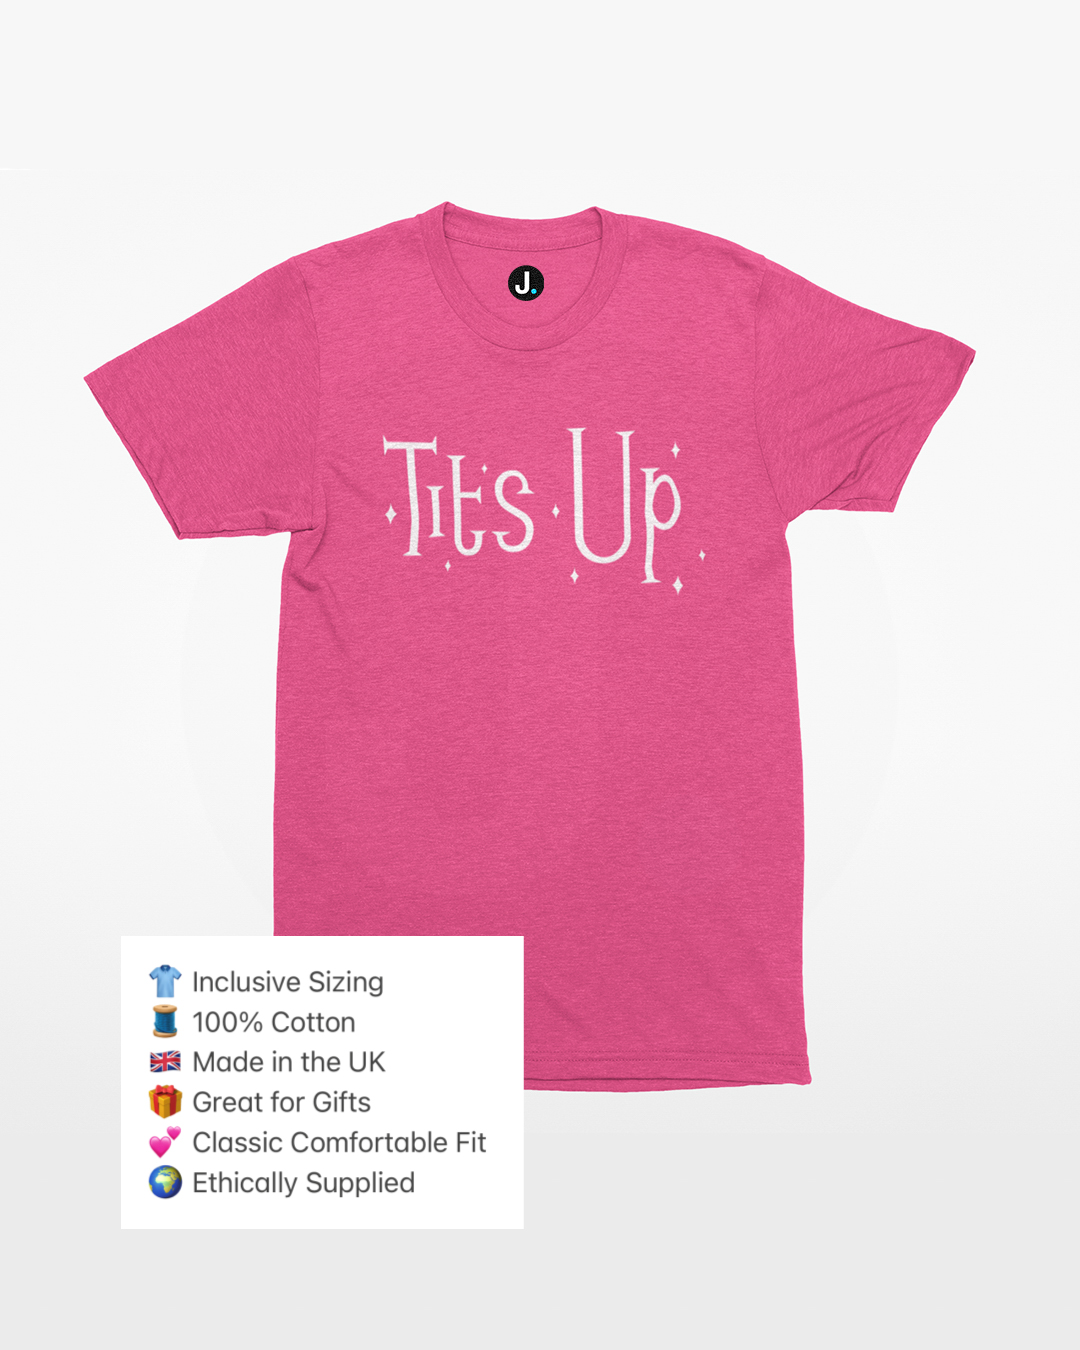 Tits Up Mrs Maisel Inspired T-Shirt - Tits Up T-Shirt - The Marvelous Mrs Maisel Inspired T-Shirt - Mrs Maisel Tits Up T-Shirt